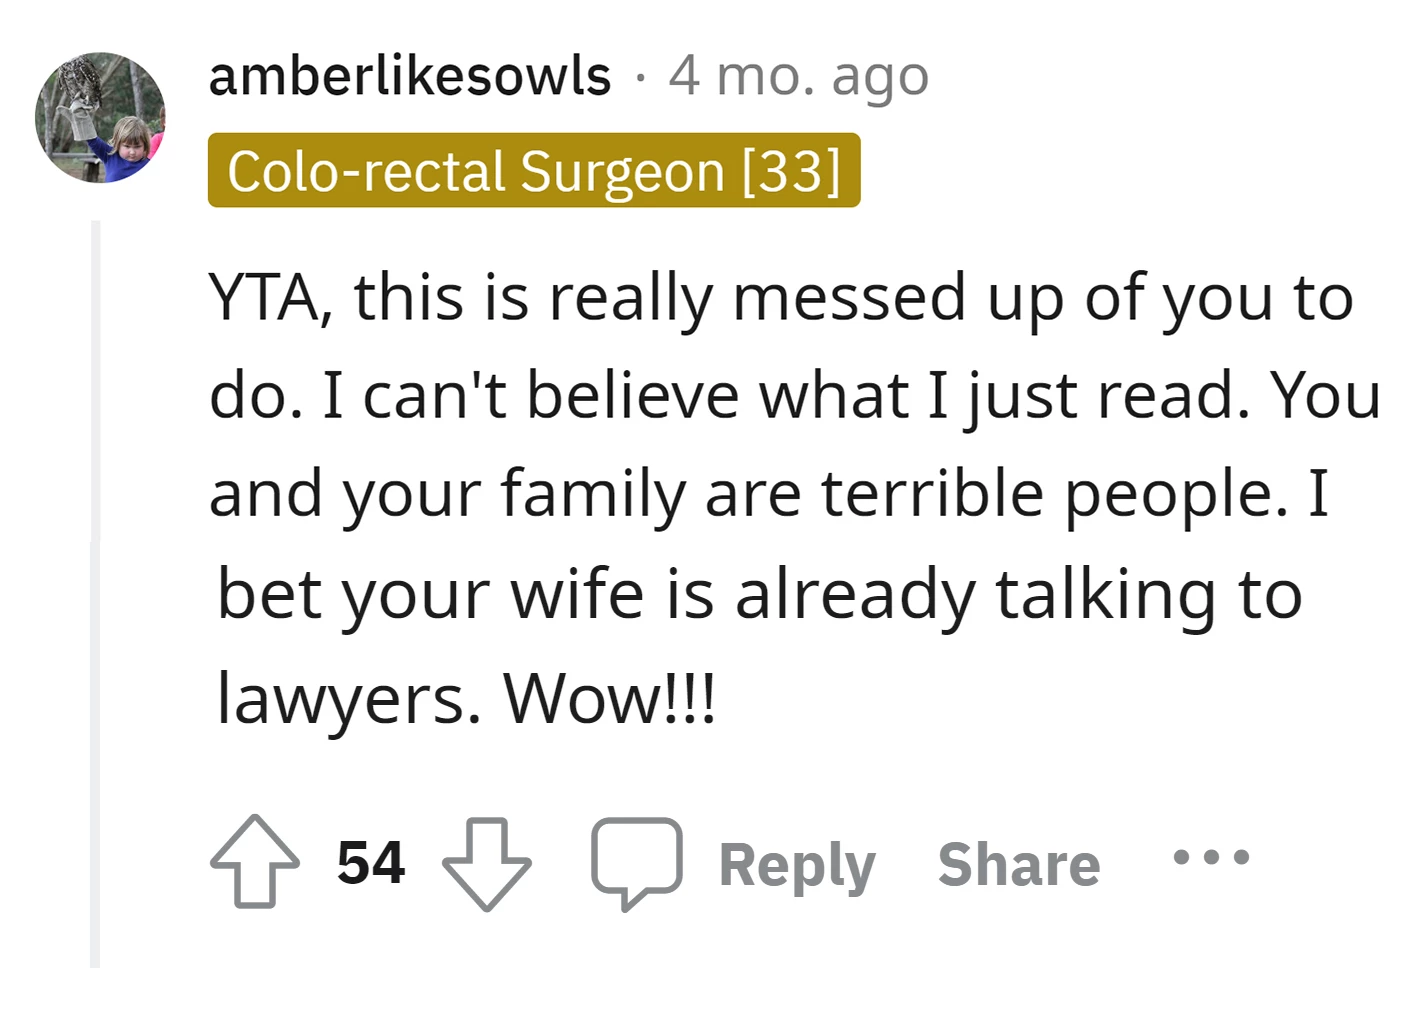 His wife might consult lawyers and criticizing both the OP and his family